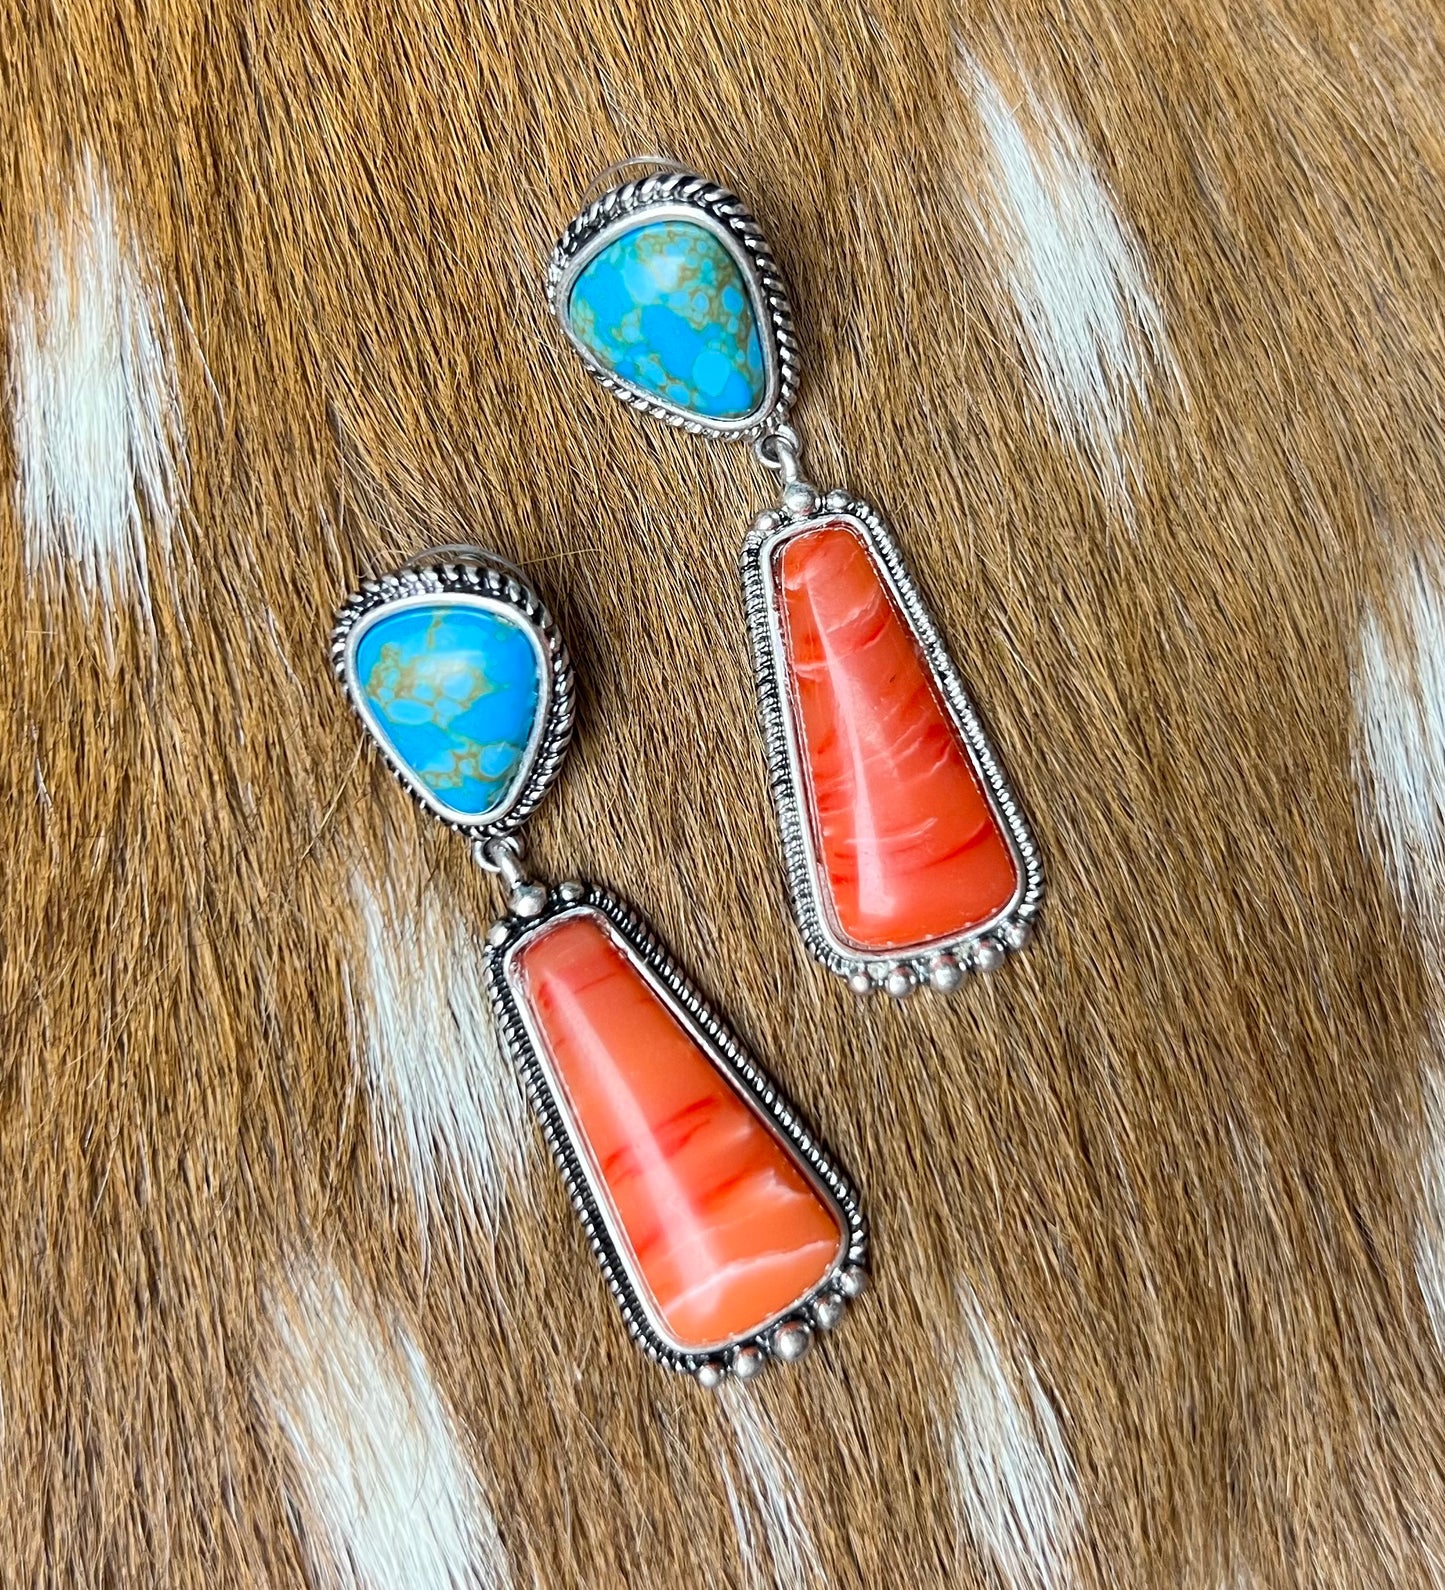 Orange and Turquoise Marbled Gallup Earrings